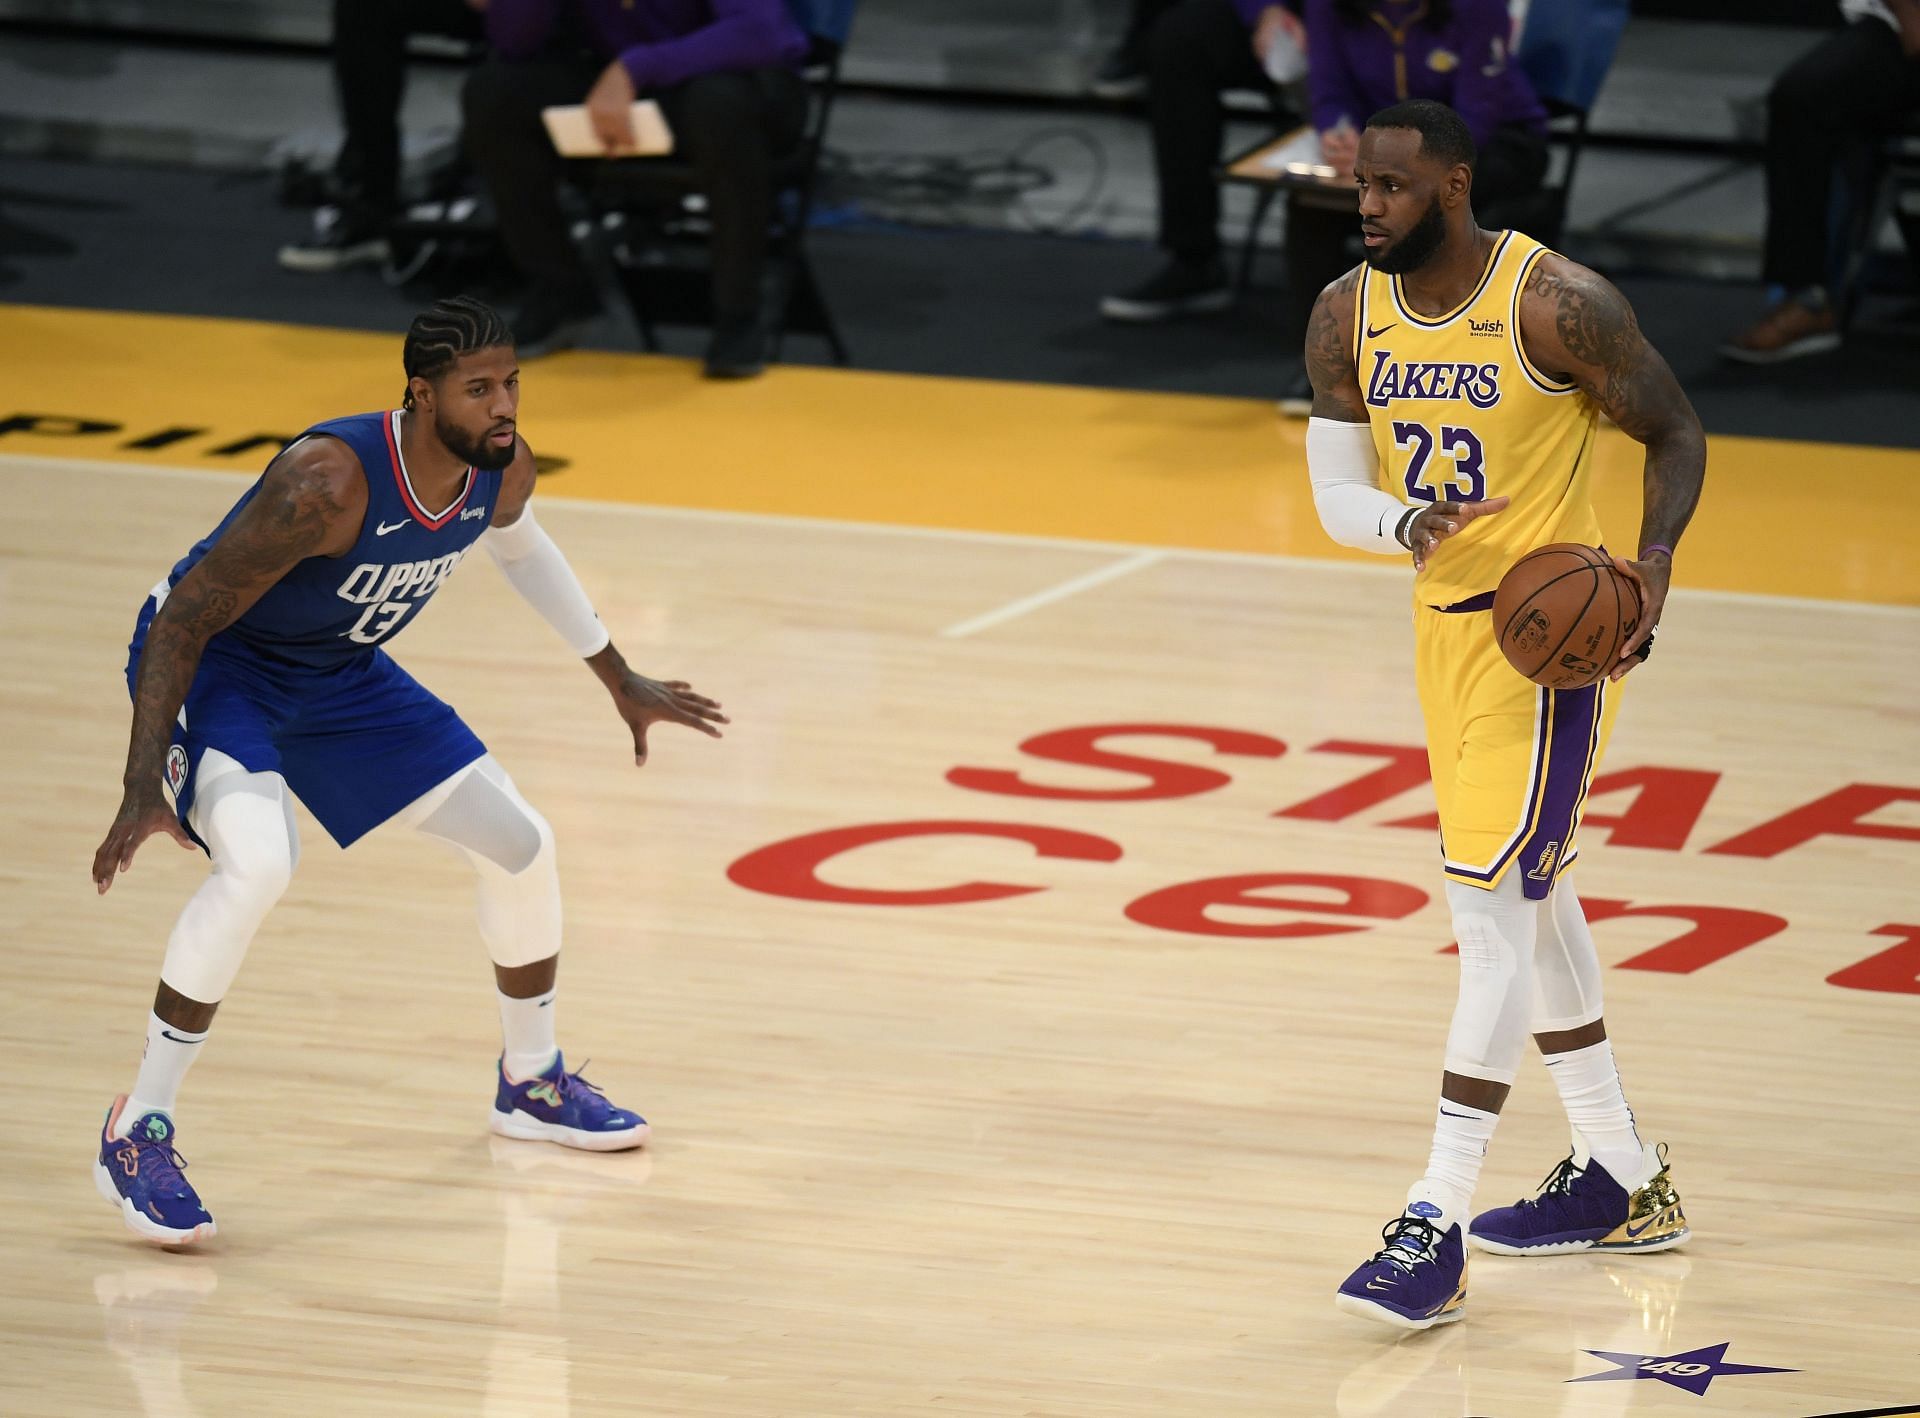 The LA Clippers and the LA Lakers will face off at Staples Center on Friday